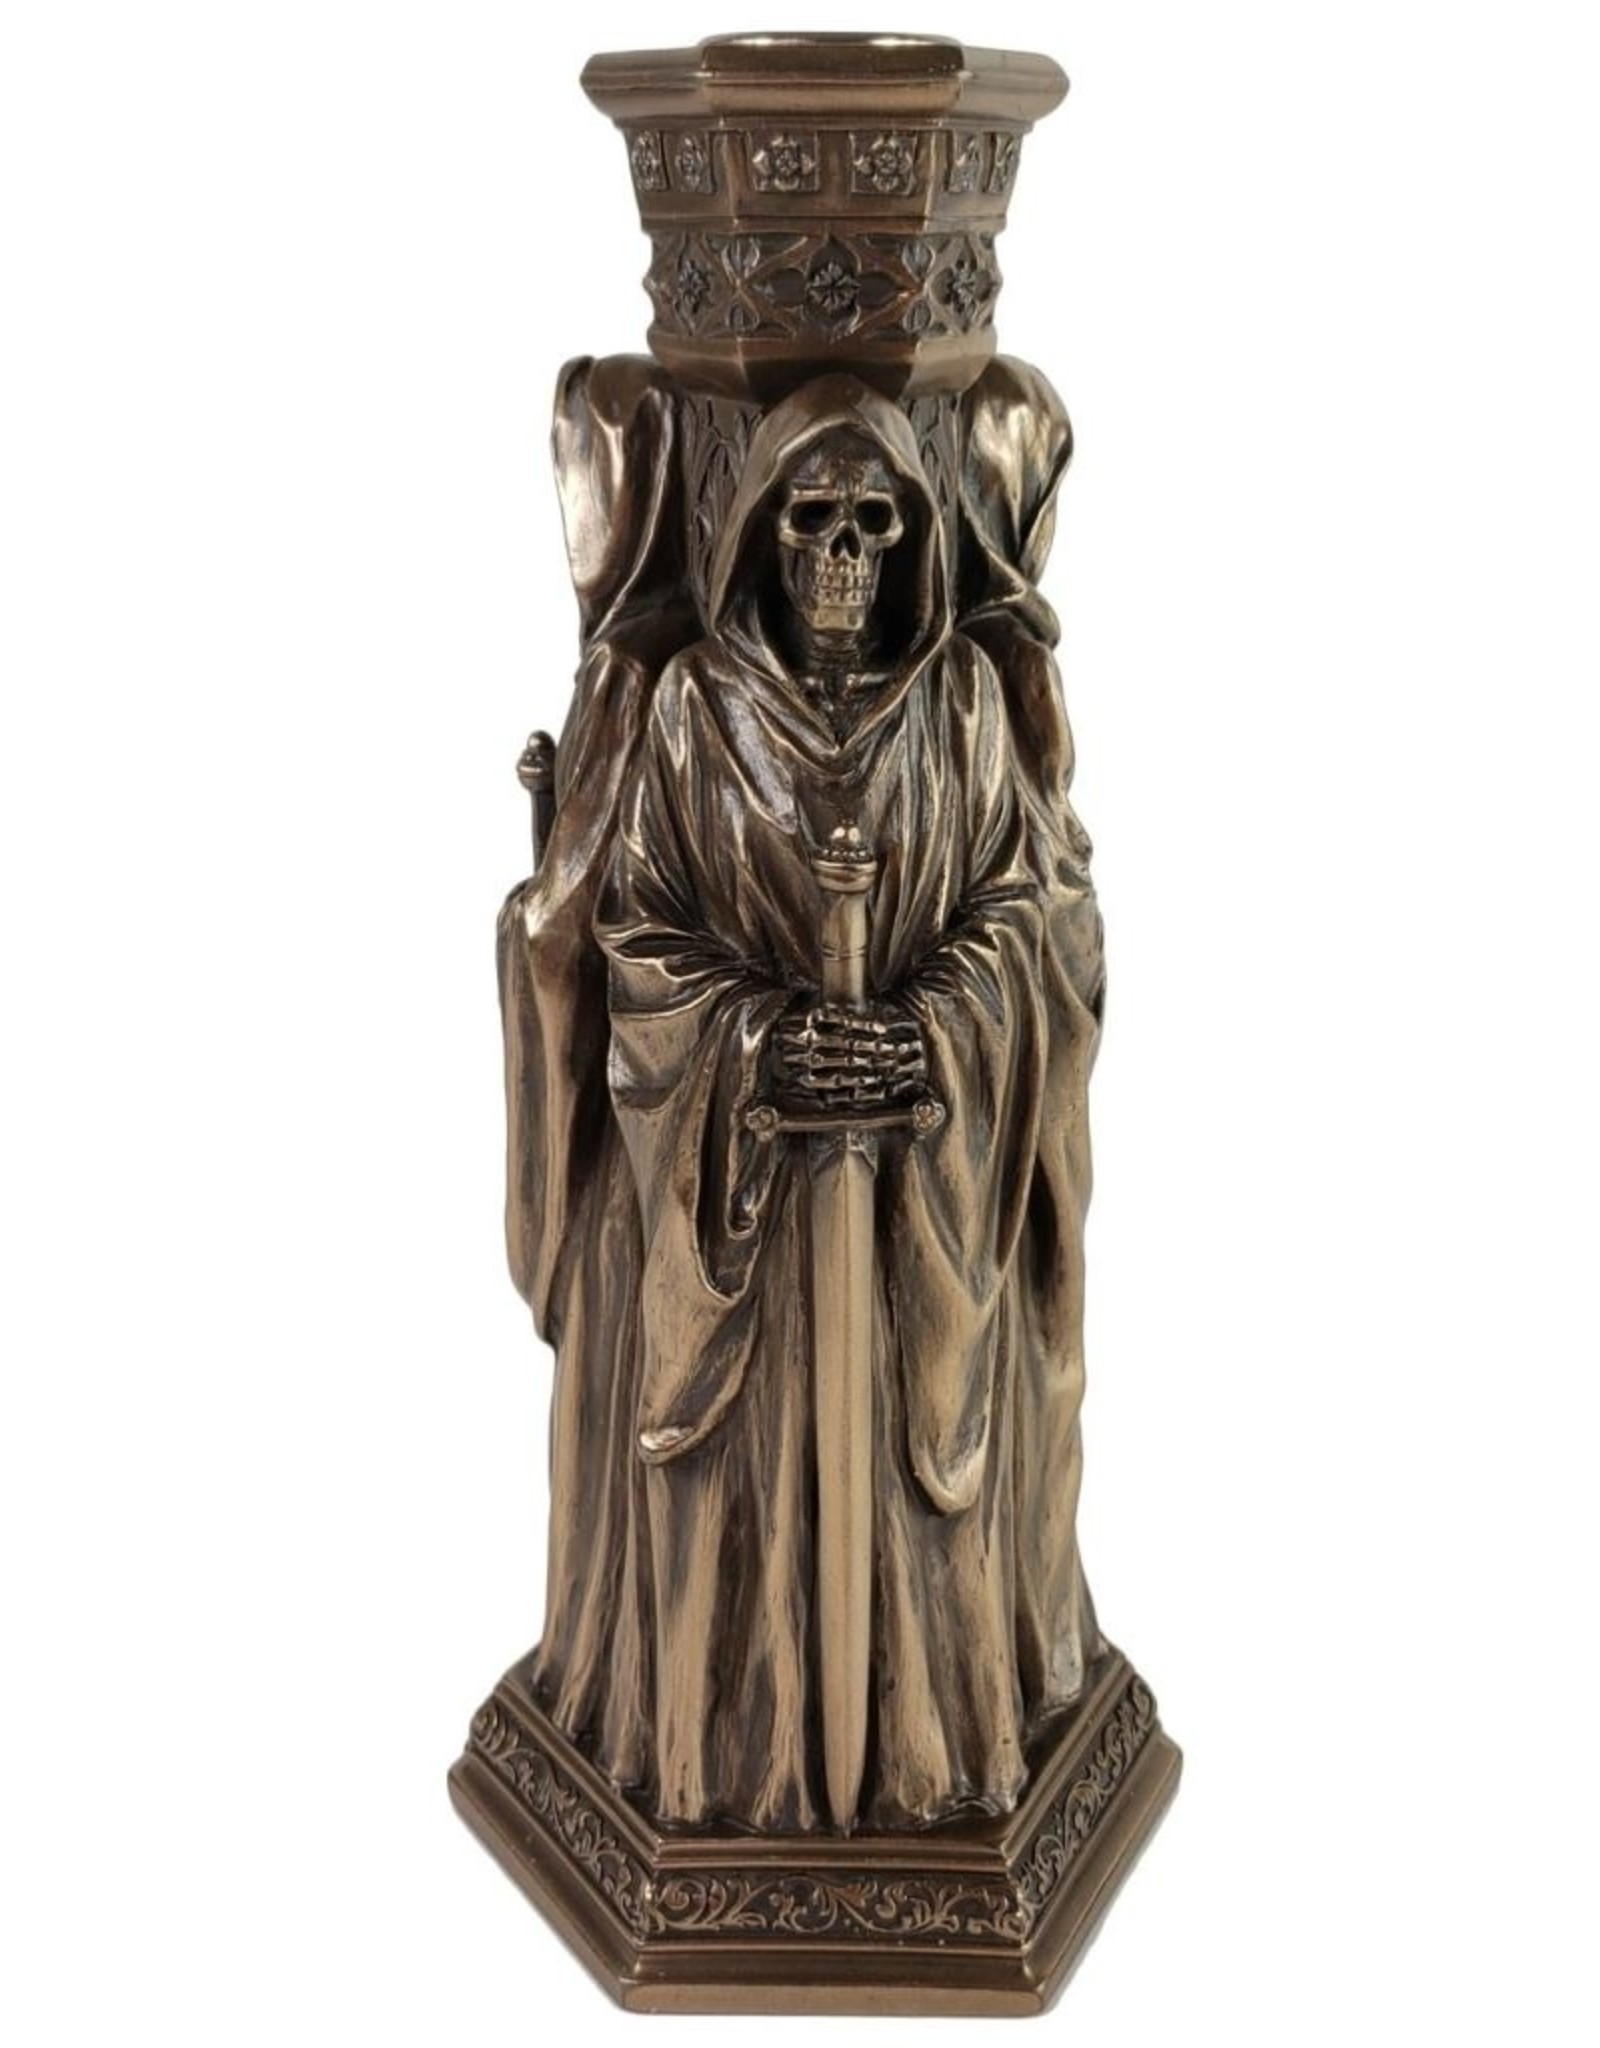 Veronese Design Giftware & Lifestyle - Three Grim Reapers Candle Stand 21cm